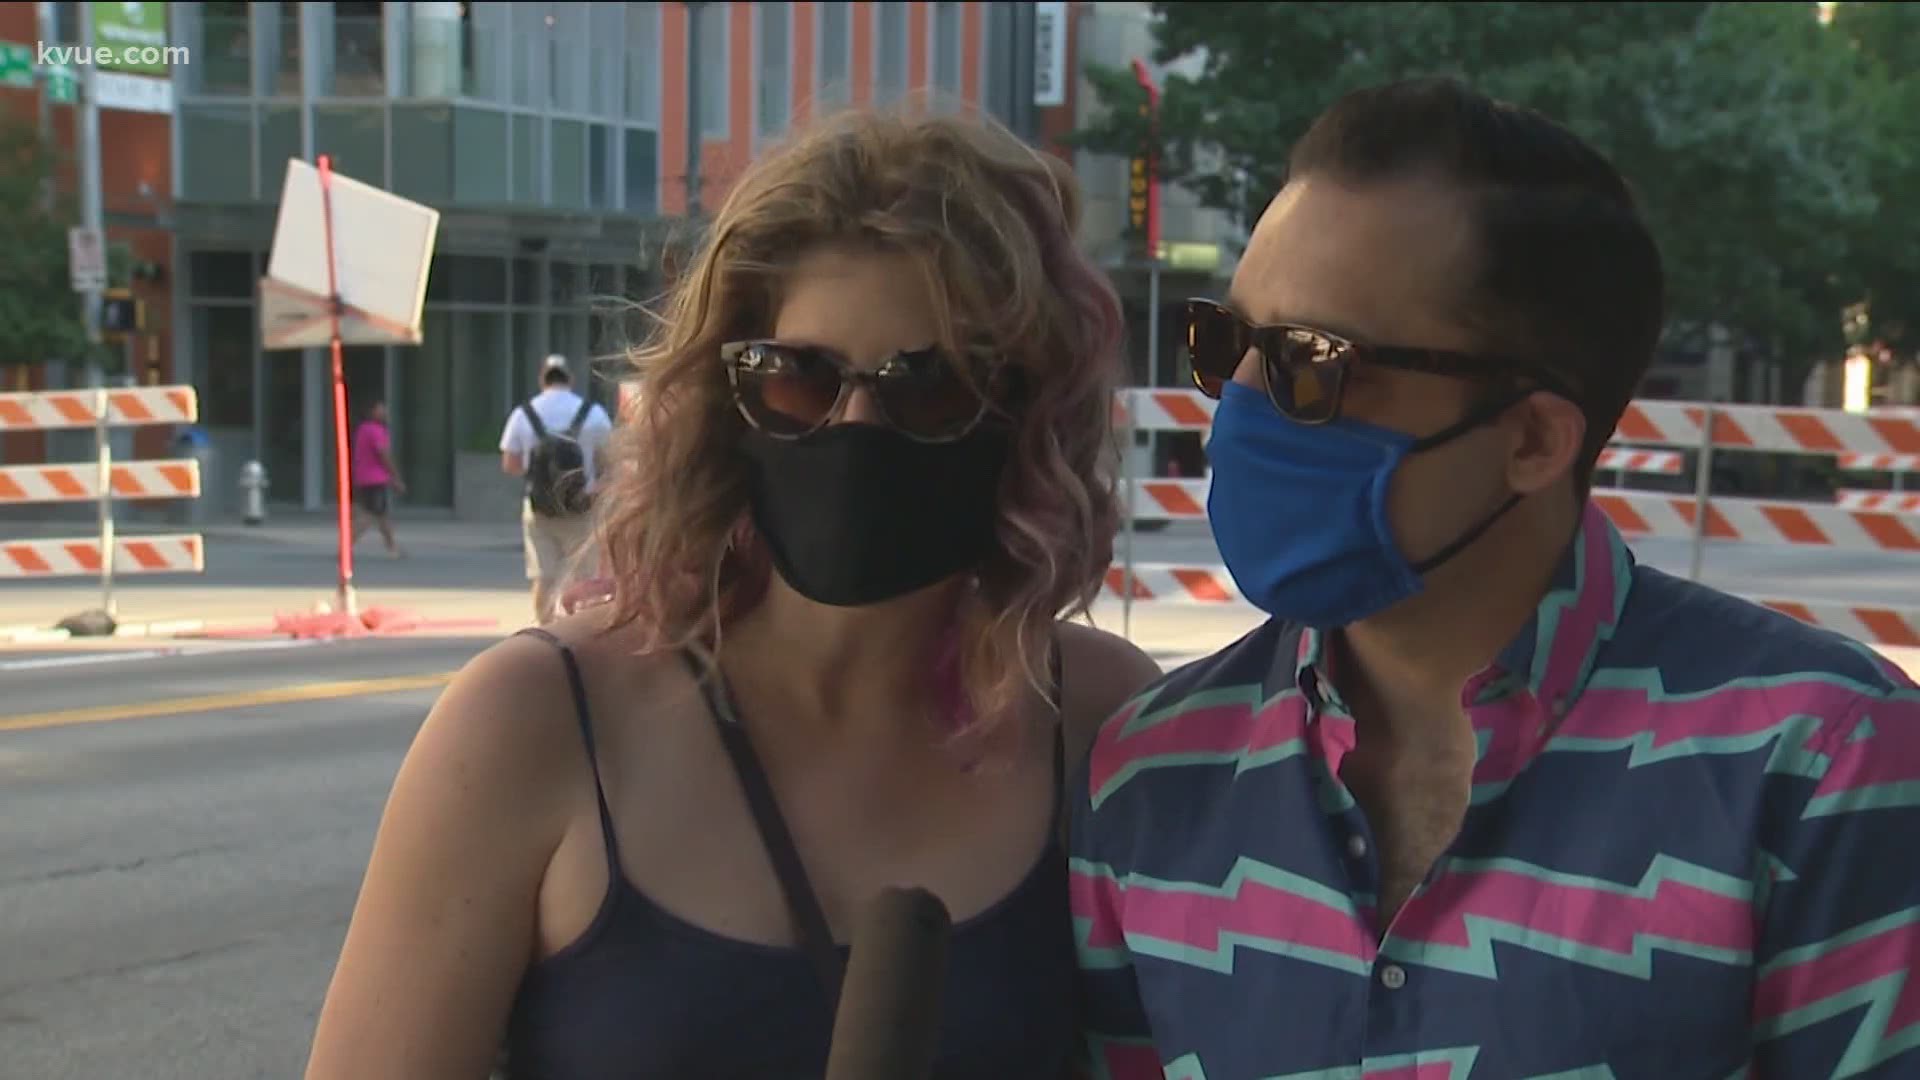 KVUE Photojournalist Andrew Sanchez went downtown to ask Austinites to share some positivity.